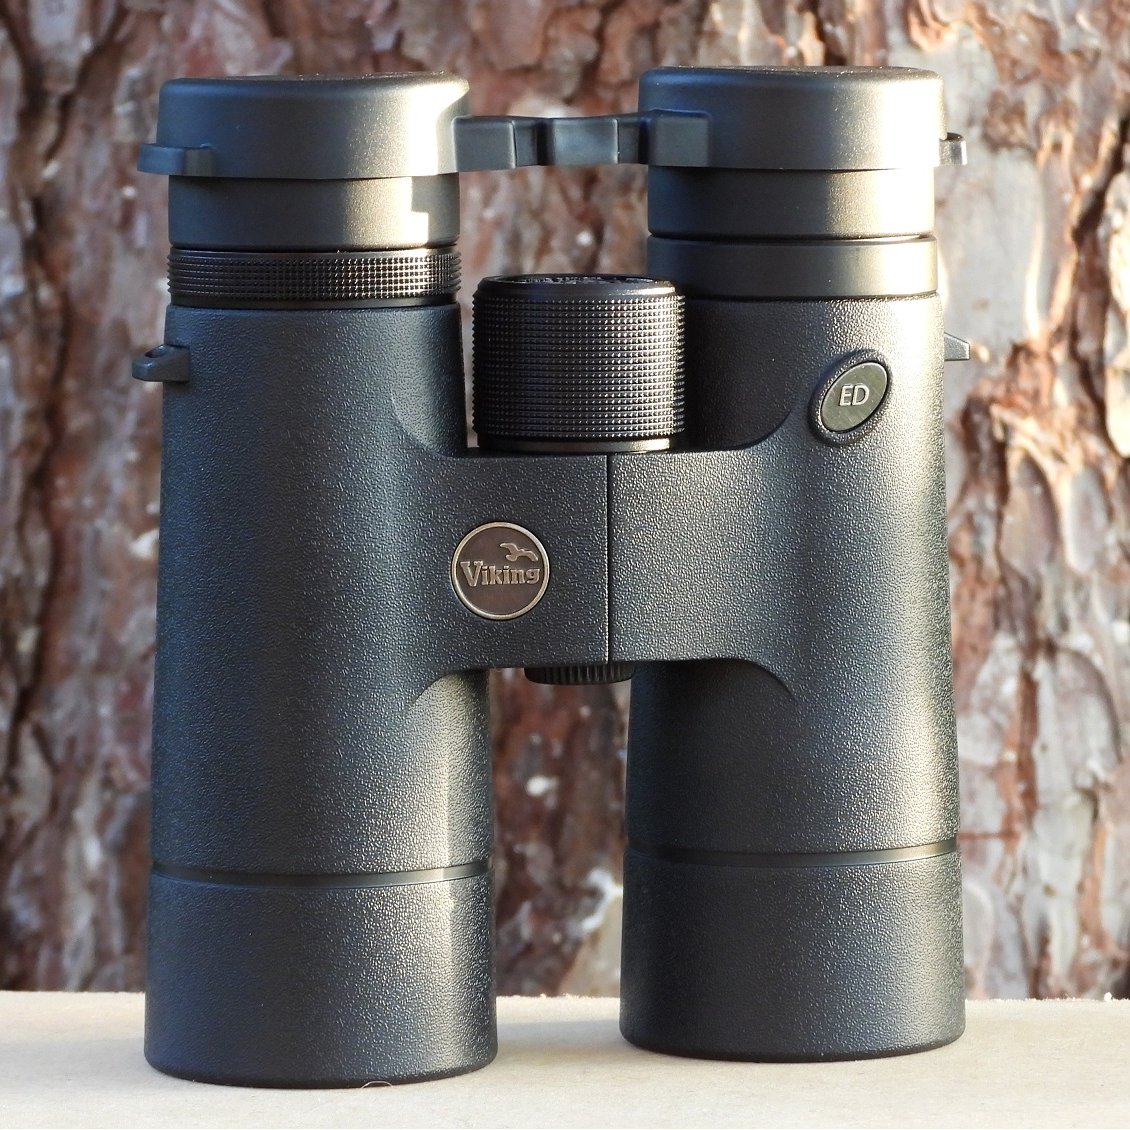 The @VikingOptical Osprey ED #binoculars offer an impressive range of features: Flat field vision with edge to edge sharpness ED glass & dielectric coatings Supremely bright images Excellent colour rendition 10 year warranty Available in 8x42 or 10x42 🔽 birders-store.co.uk/viking-osprey-…